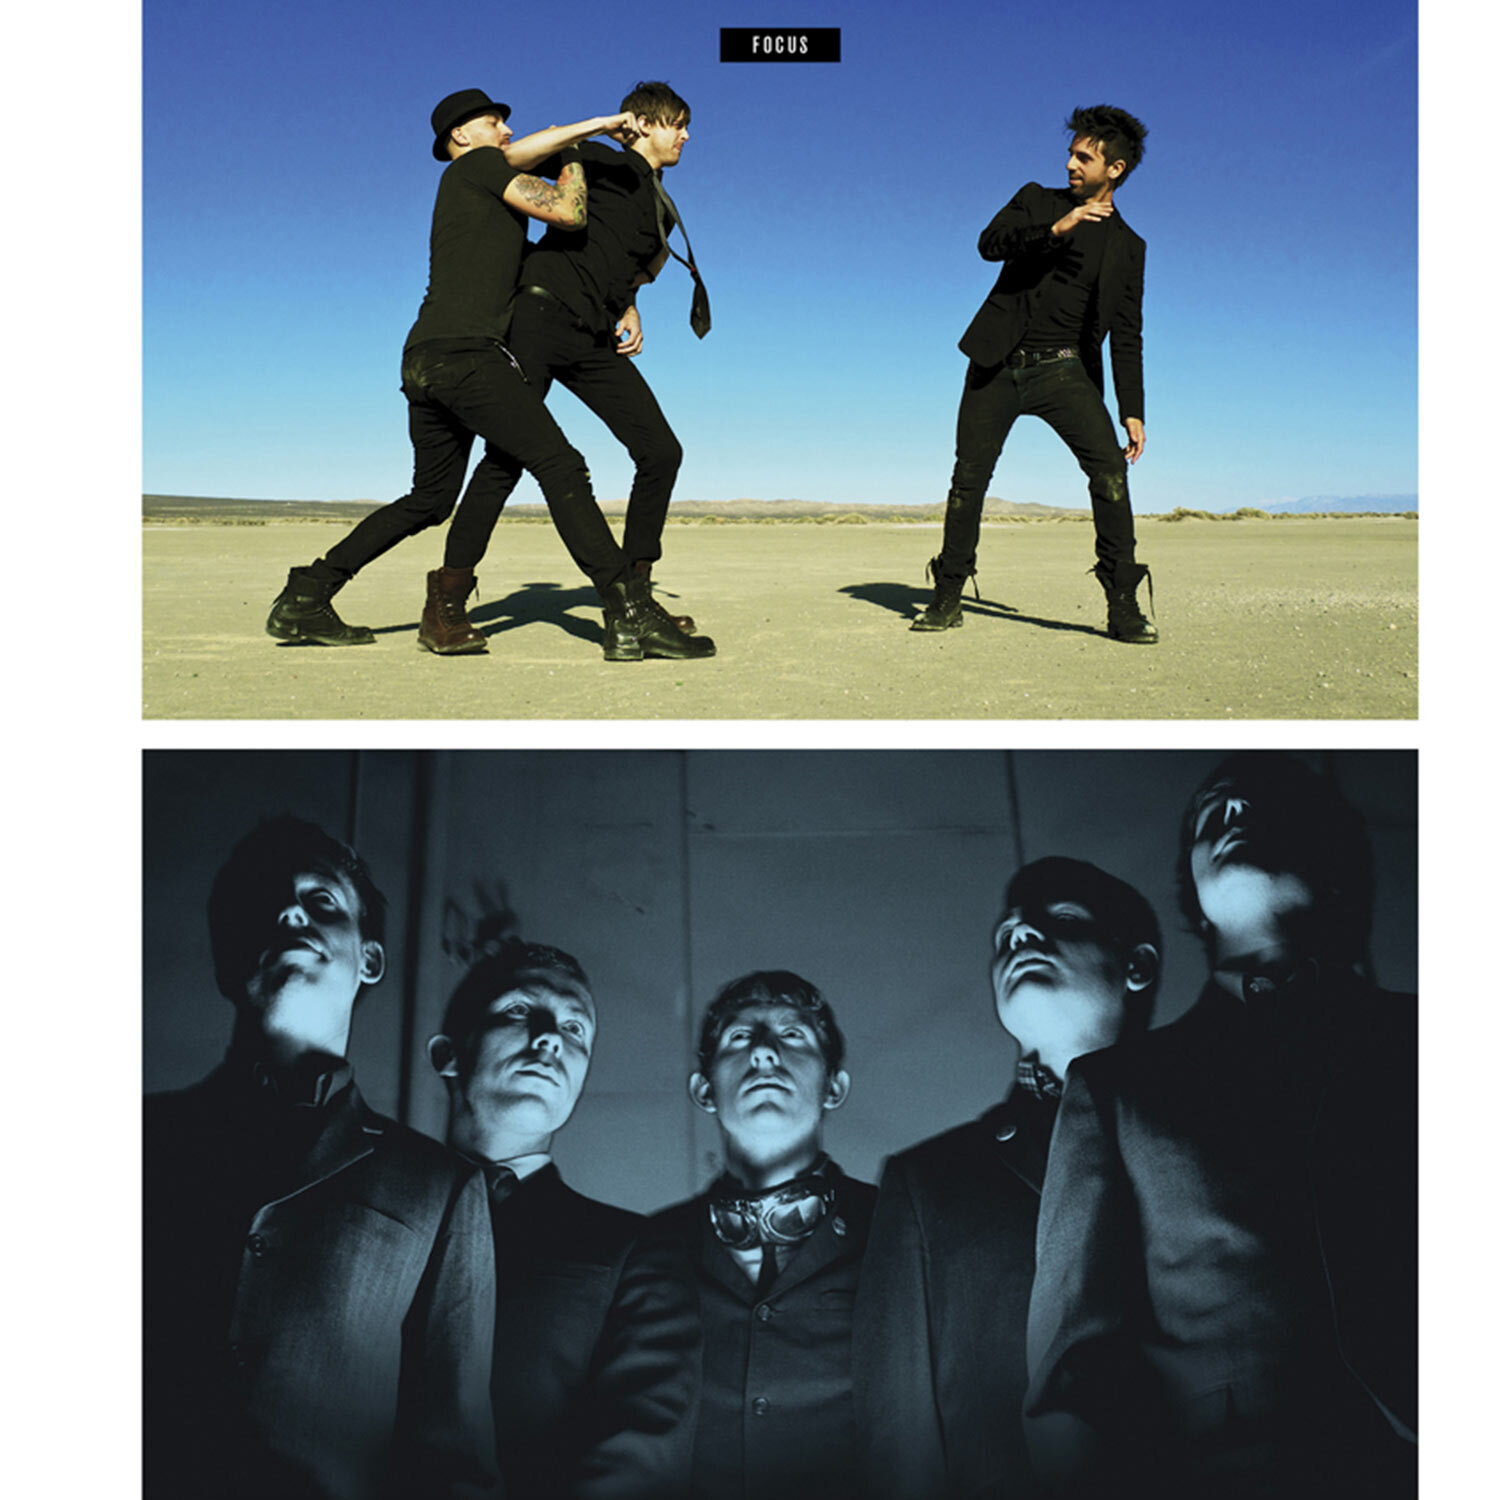 Magazine article featuring Los Angeles Photographer Mark Maryanovich two photos one band portrait three members interacting in desert second photo of five member band in V formation black and white toned blue Publication ION page 6